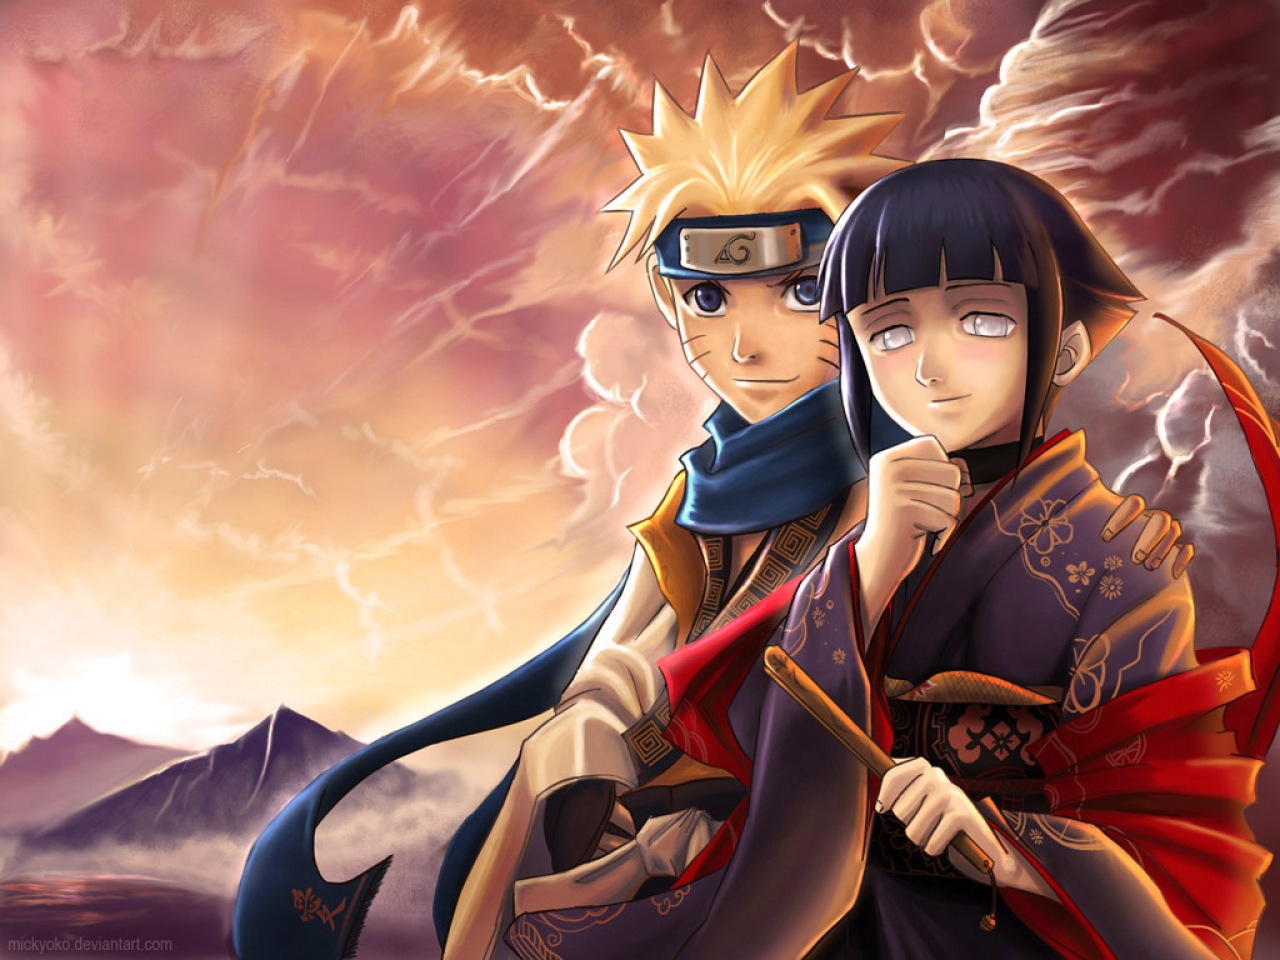 Naruto And Hinata In Love Shippuden Wallpaper On This